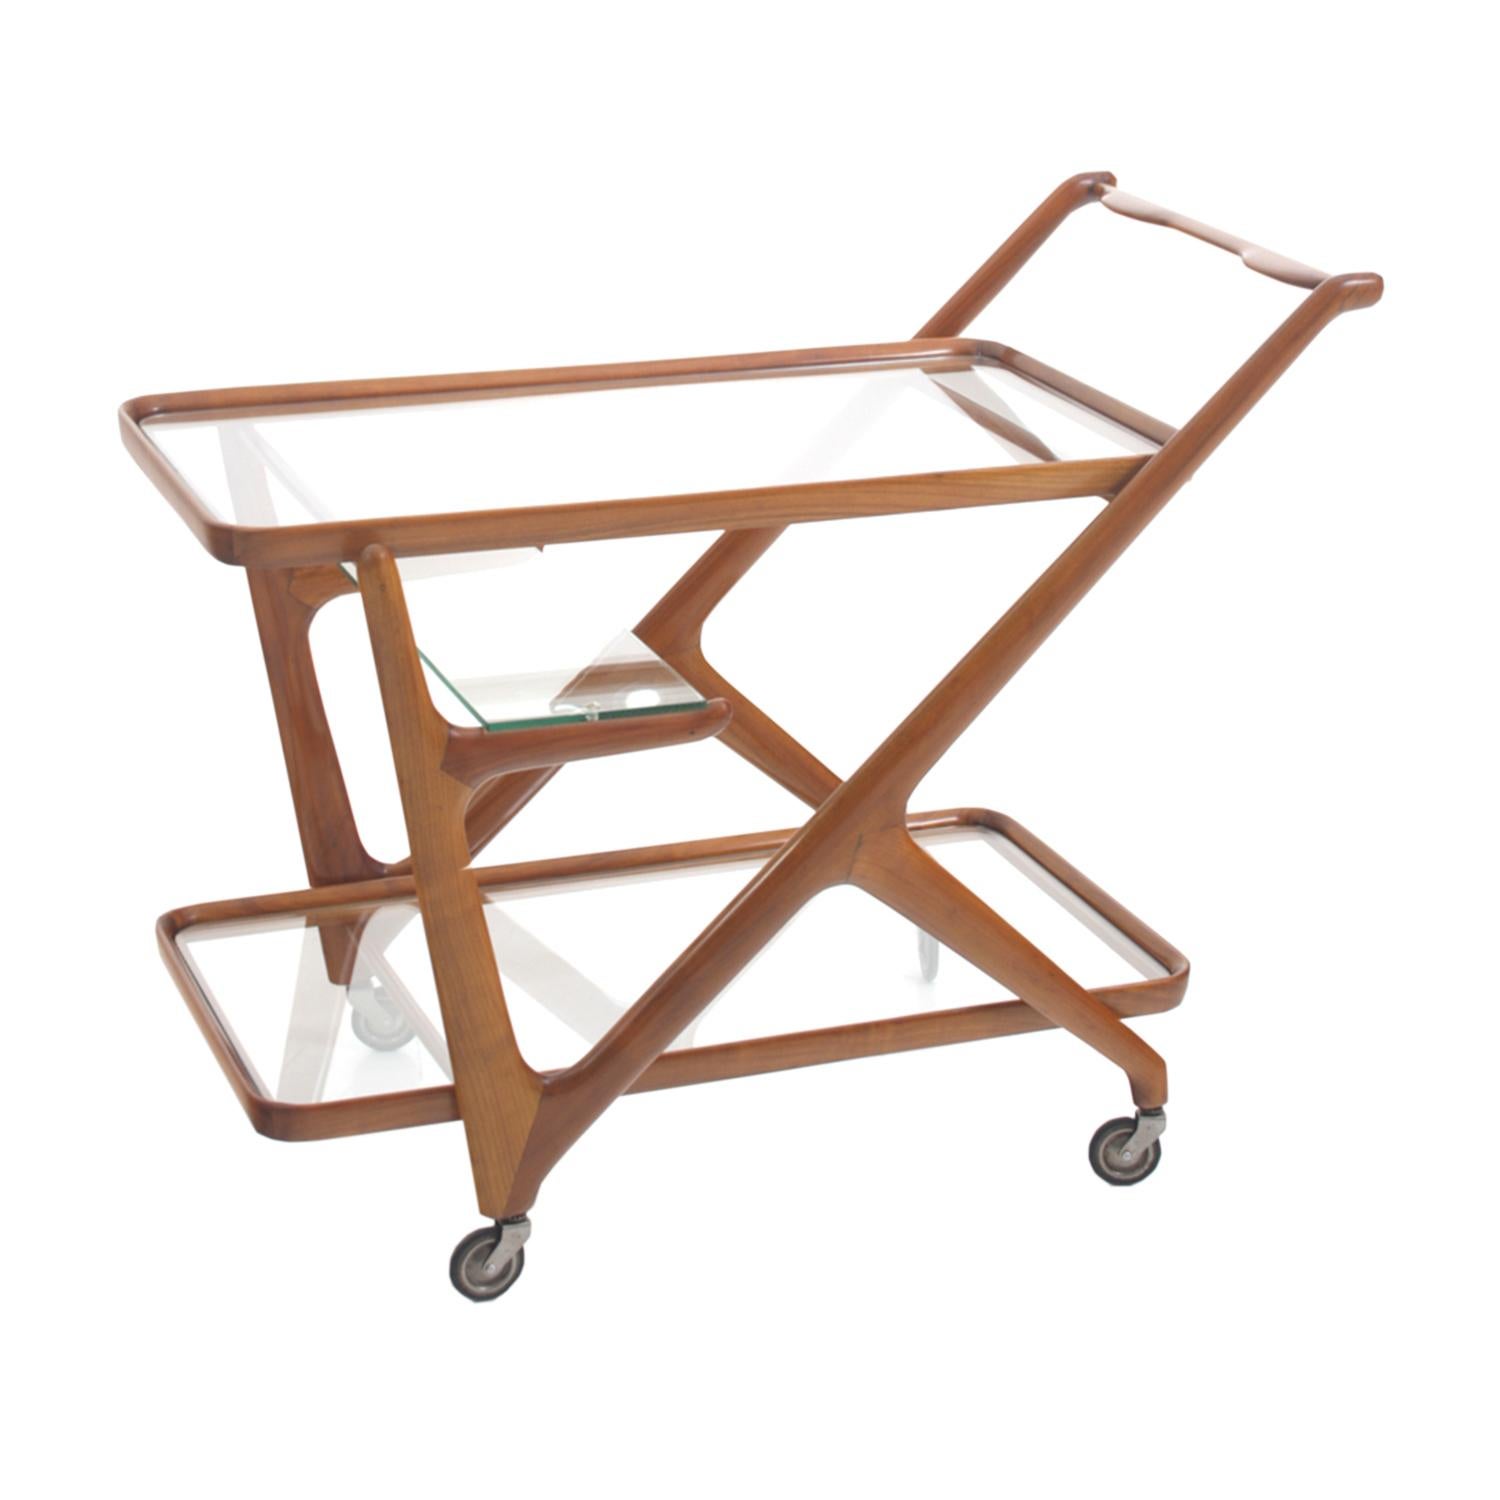 A light-brown, vintage Mid-Century modern Italian bar cart made of hand crafted polished Walnut, designed by Cesare Lacca and produced by Cassina, enhanced by detailed wood carvings, in good condition. The serving tea trolley is composed with two